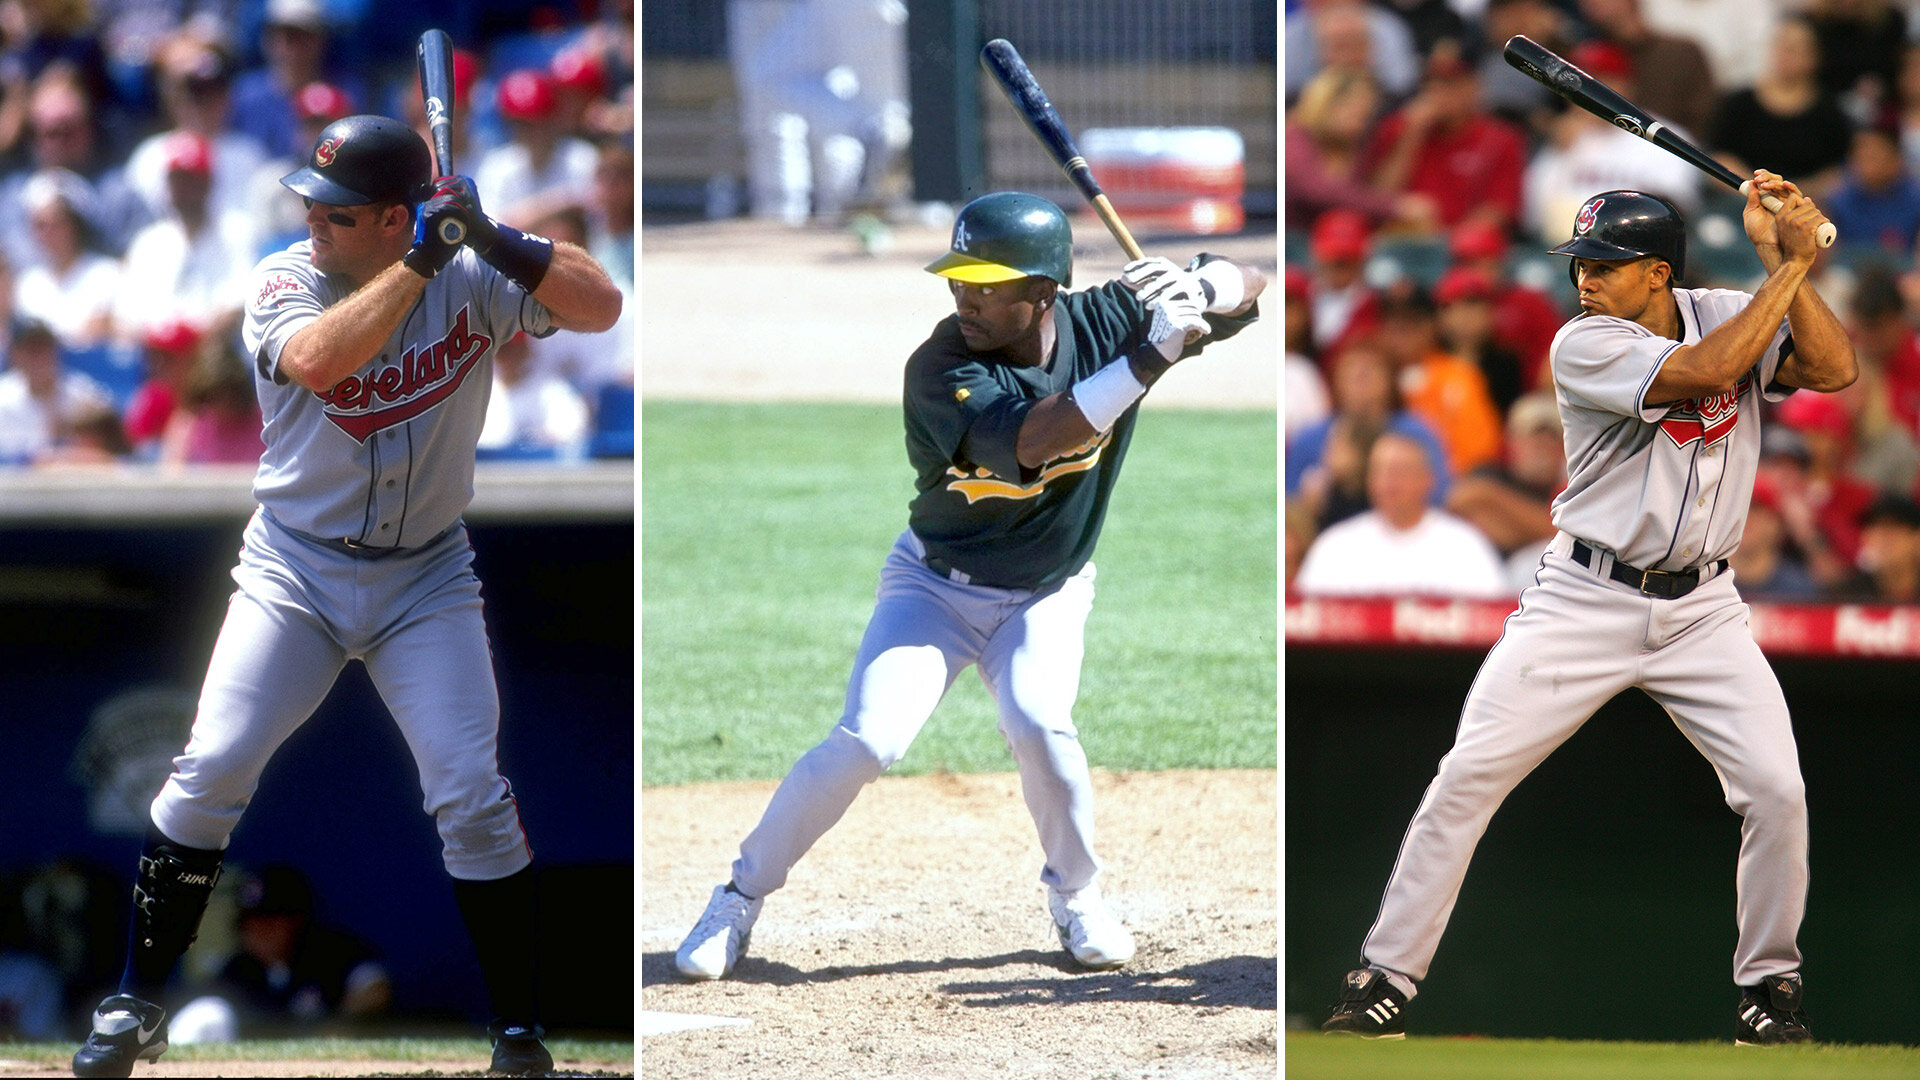 The Best Batting Stance For A Youth Hitter - JEC Baseball Info